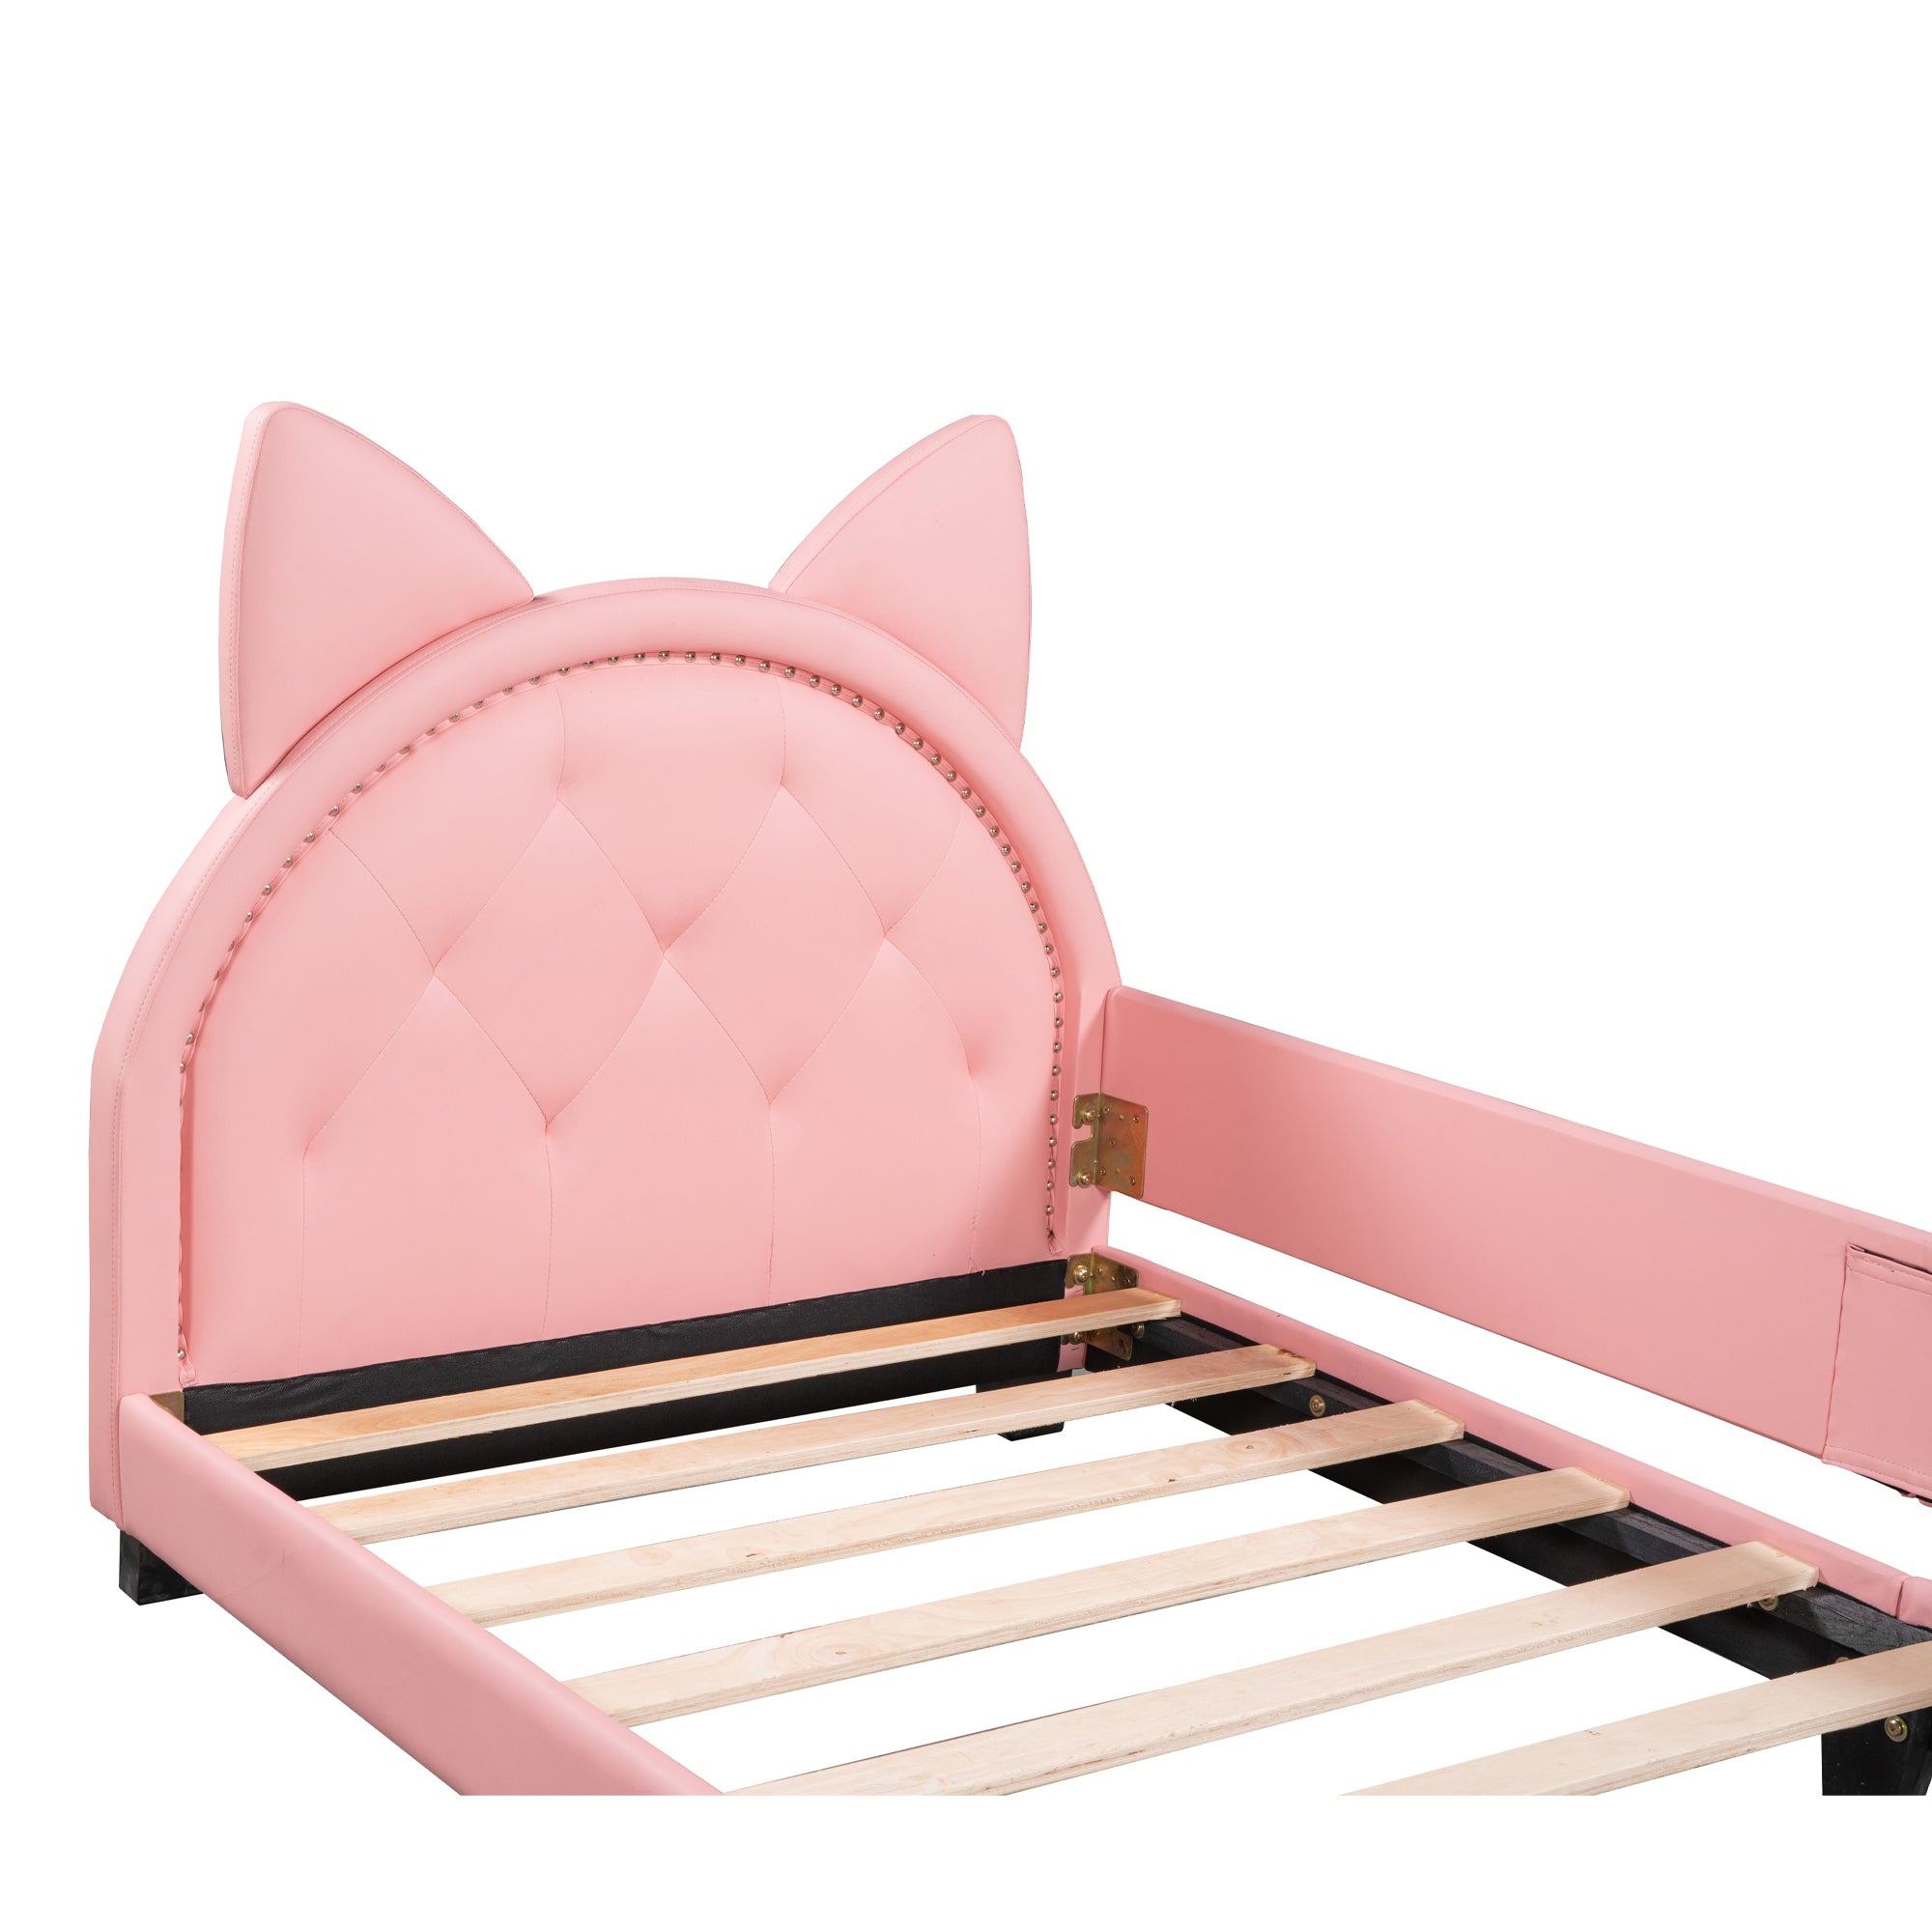 Twin Size Upholstered Daybed with Carton Ears Shaped pink-pu leather